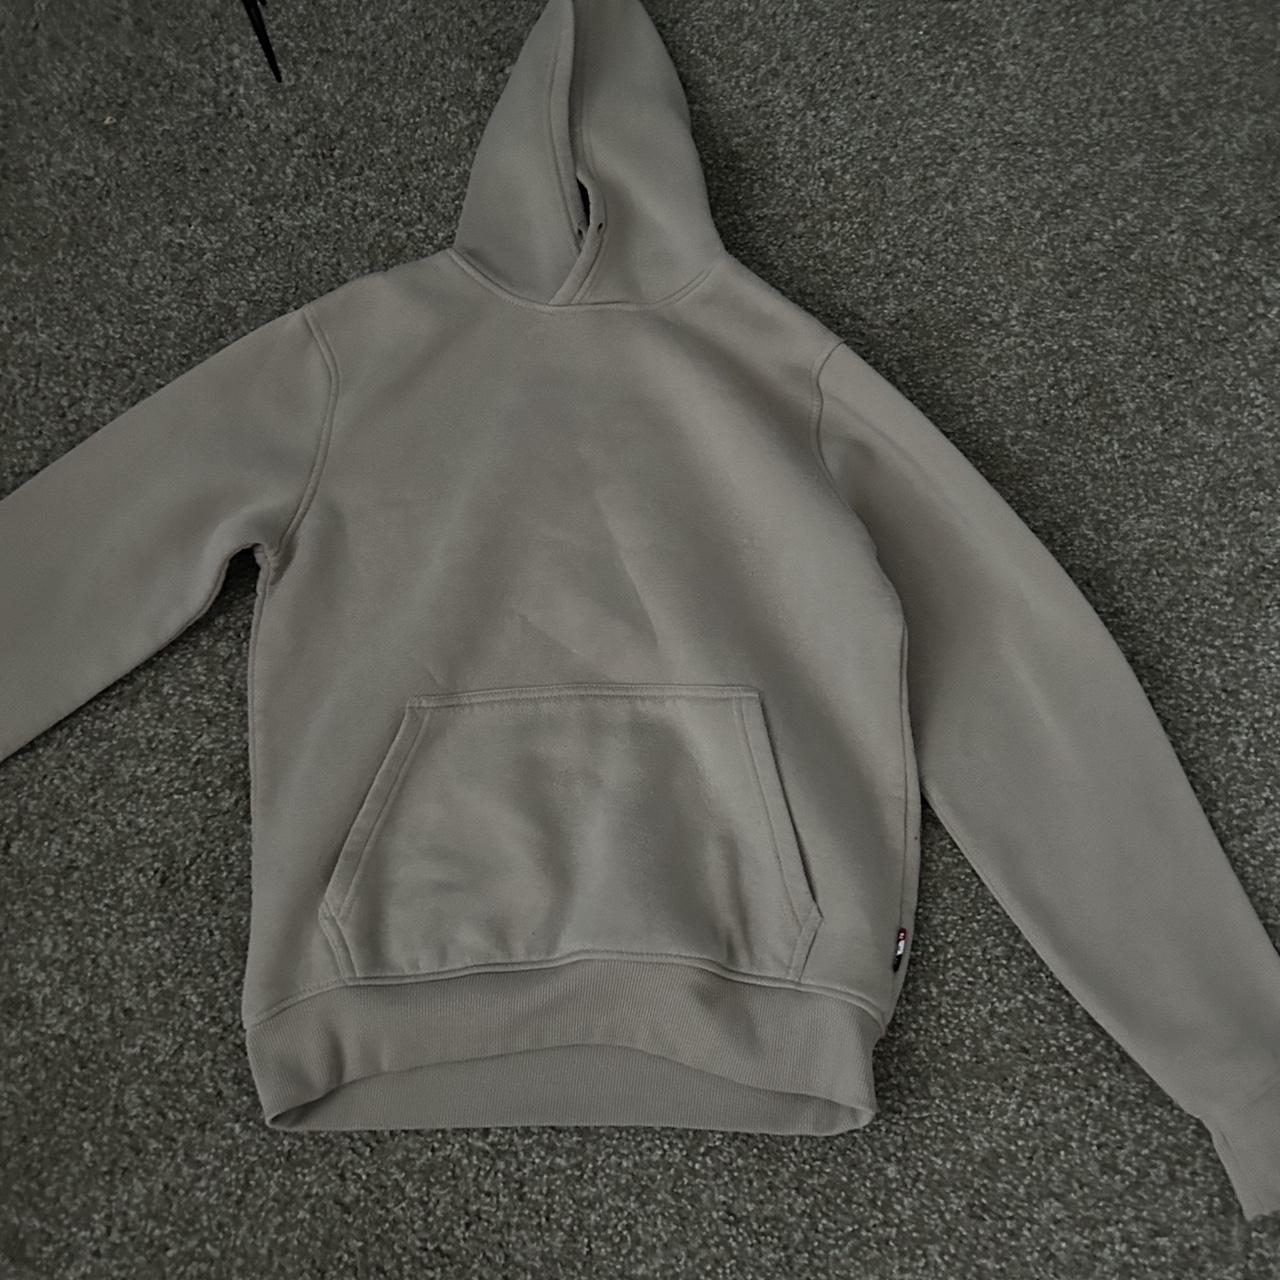 Next IT Max small hoodie Beige color Sell or trade - Depop